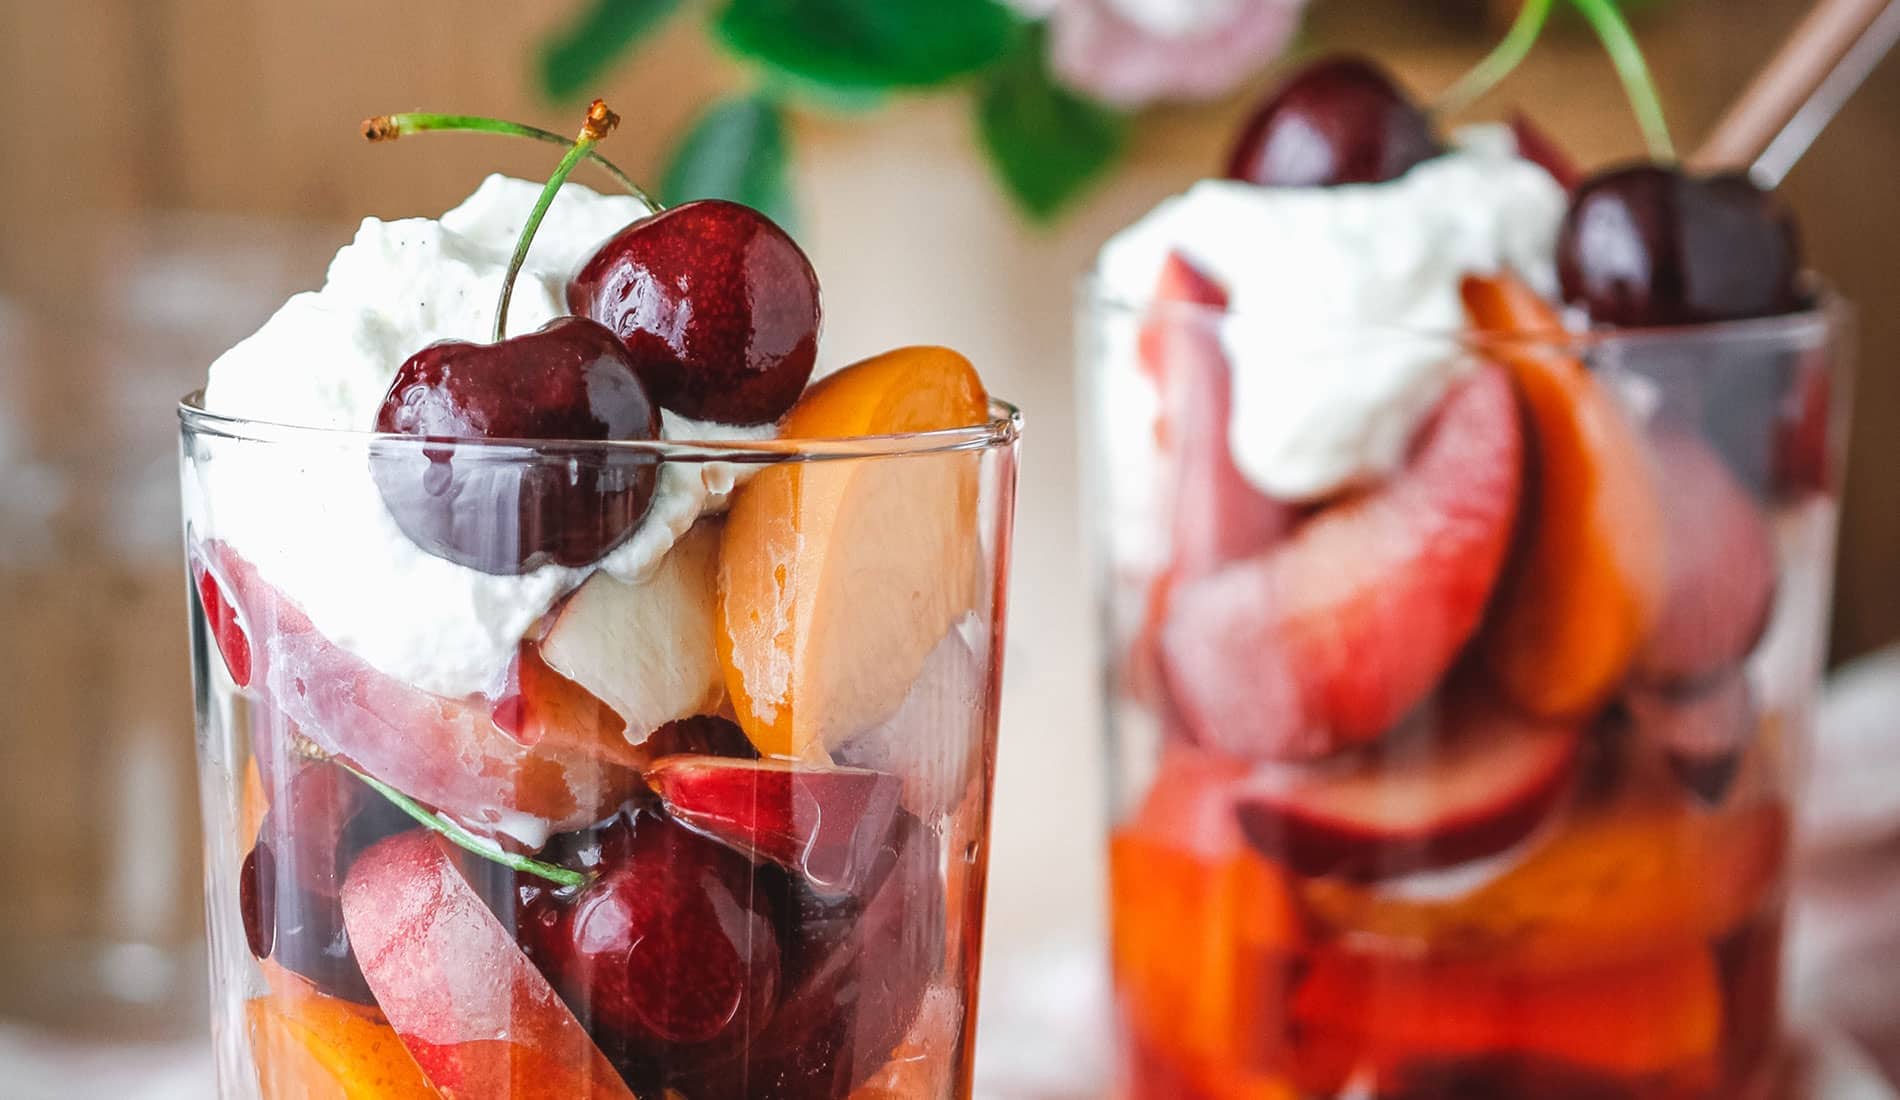 Two glass cups full of fresh fruit and cream